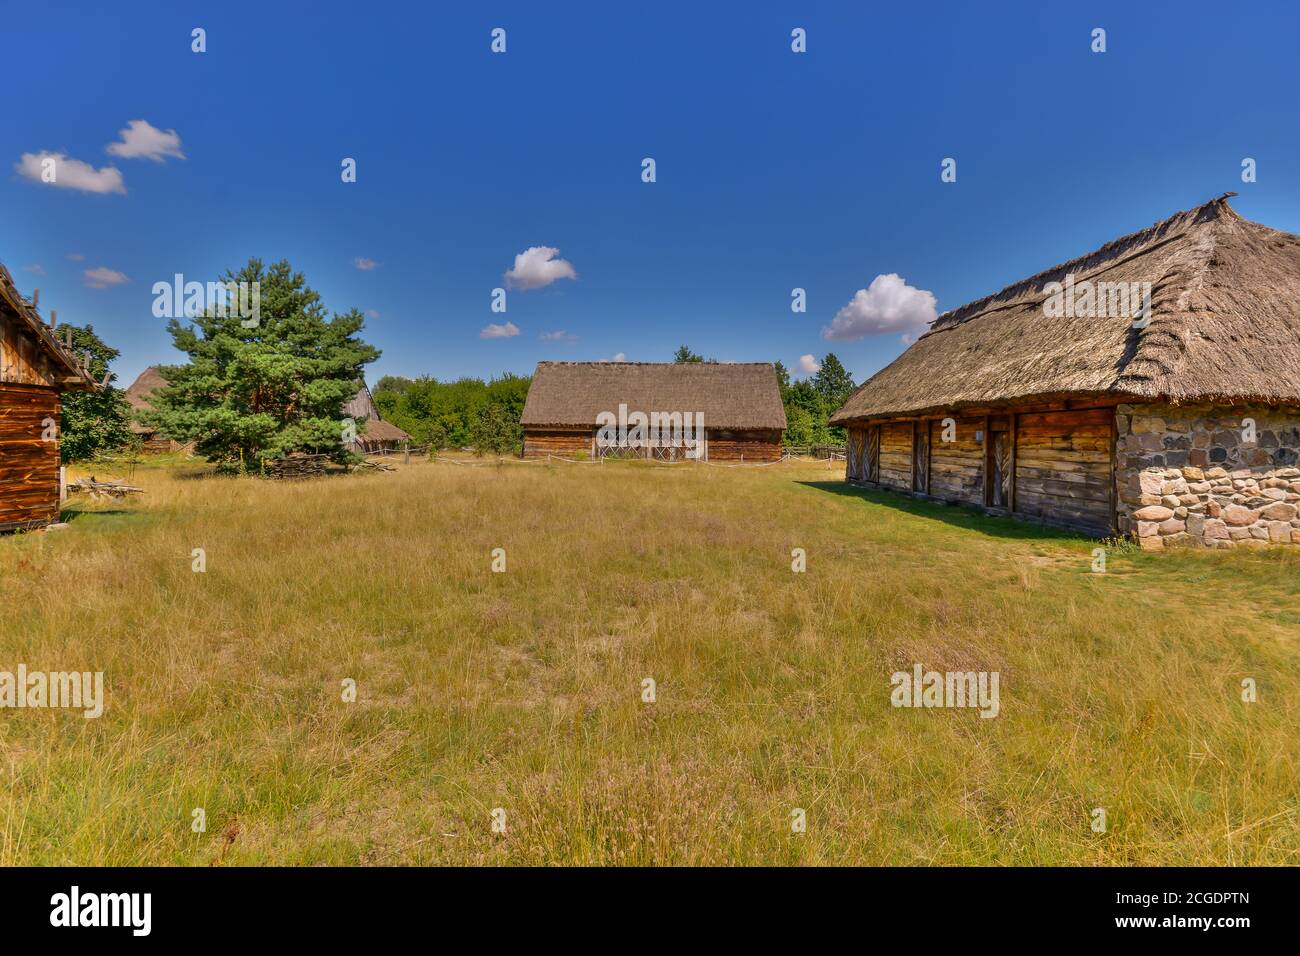 Old, historic rural buildings, Poland Stock Photo